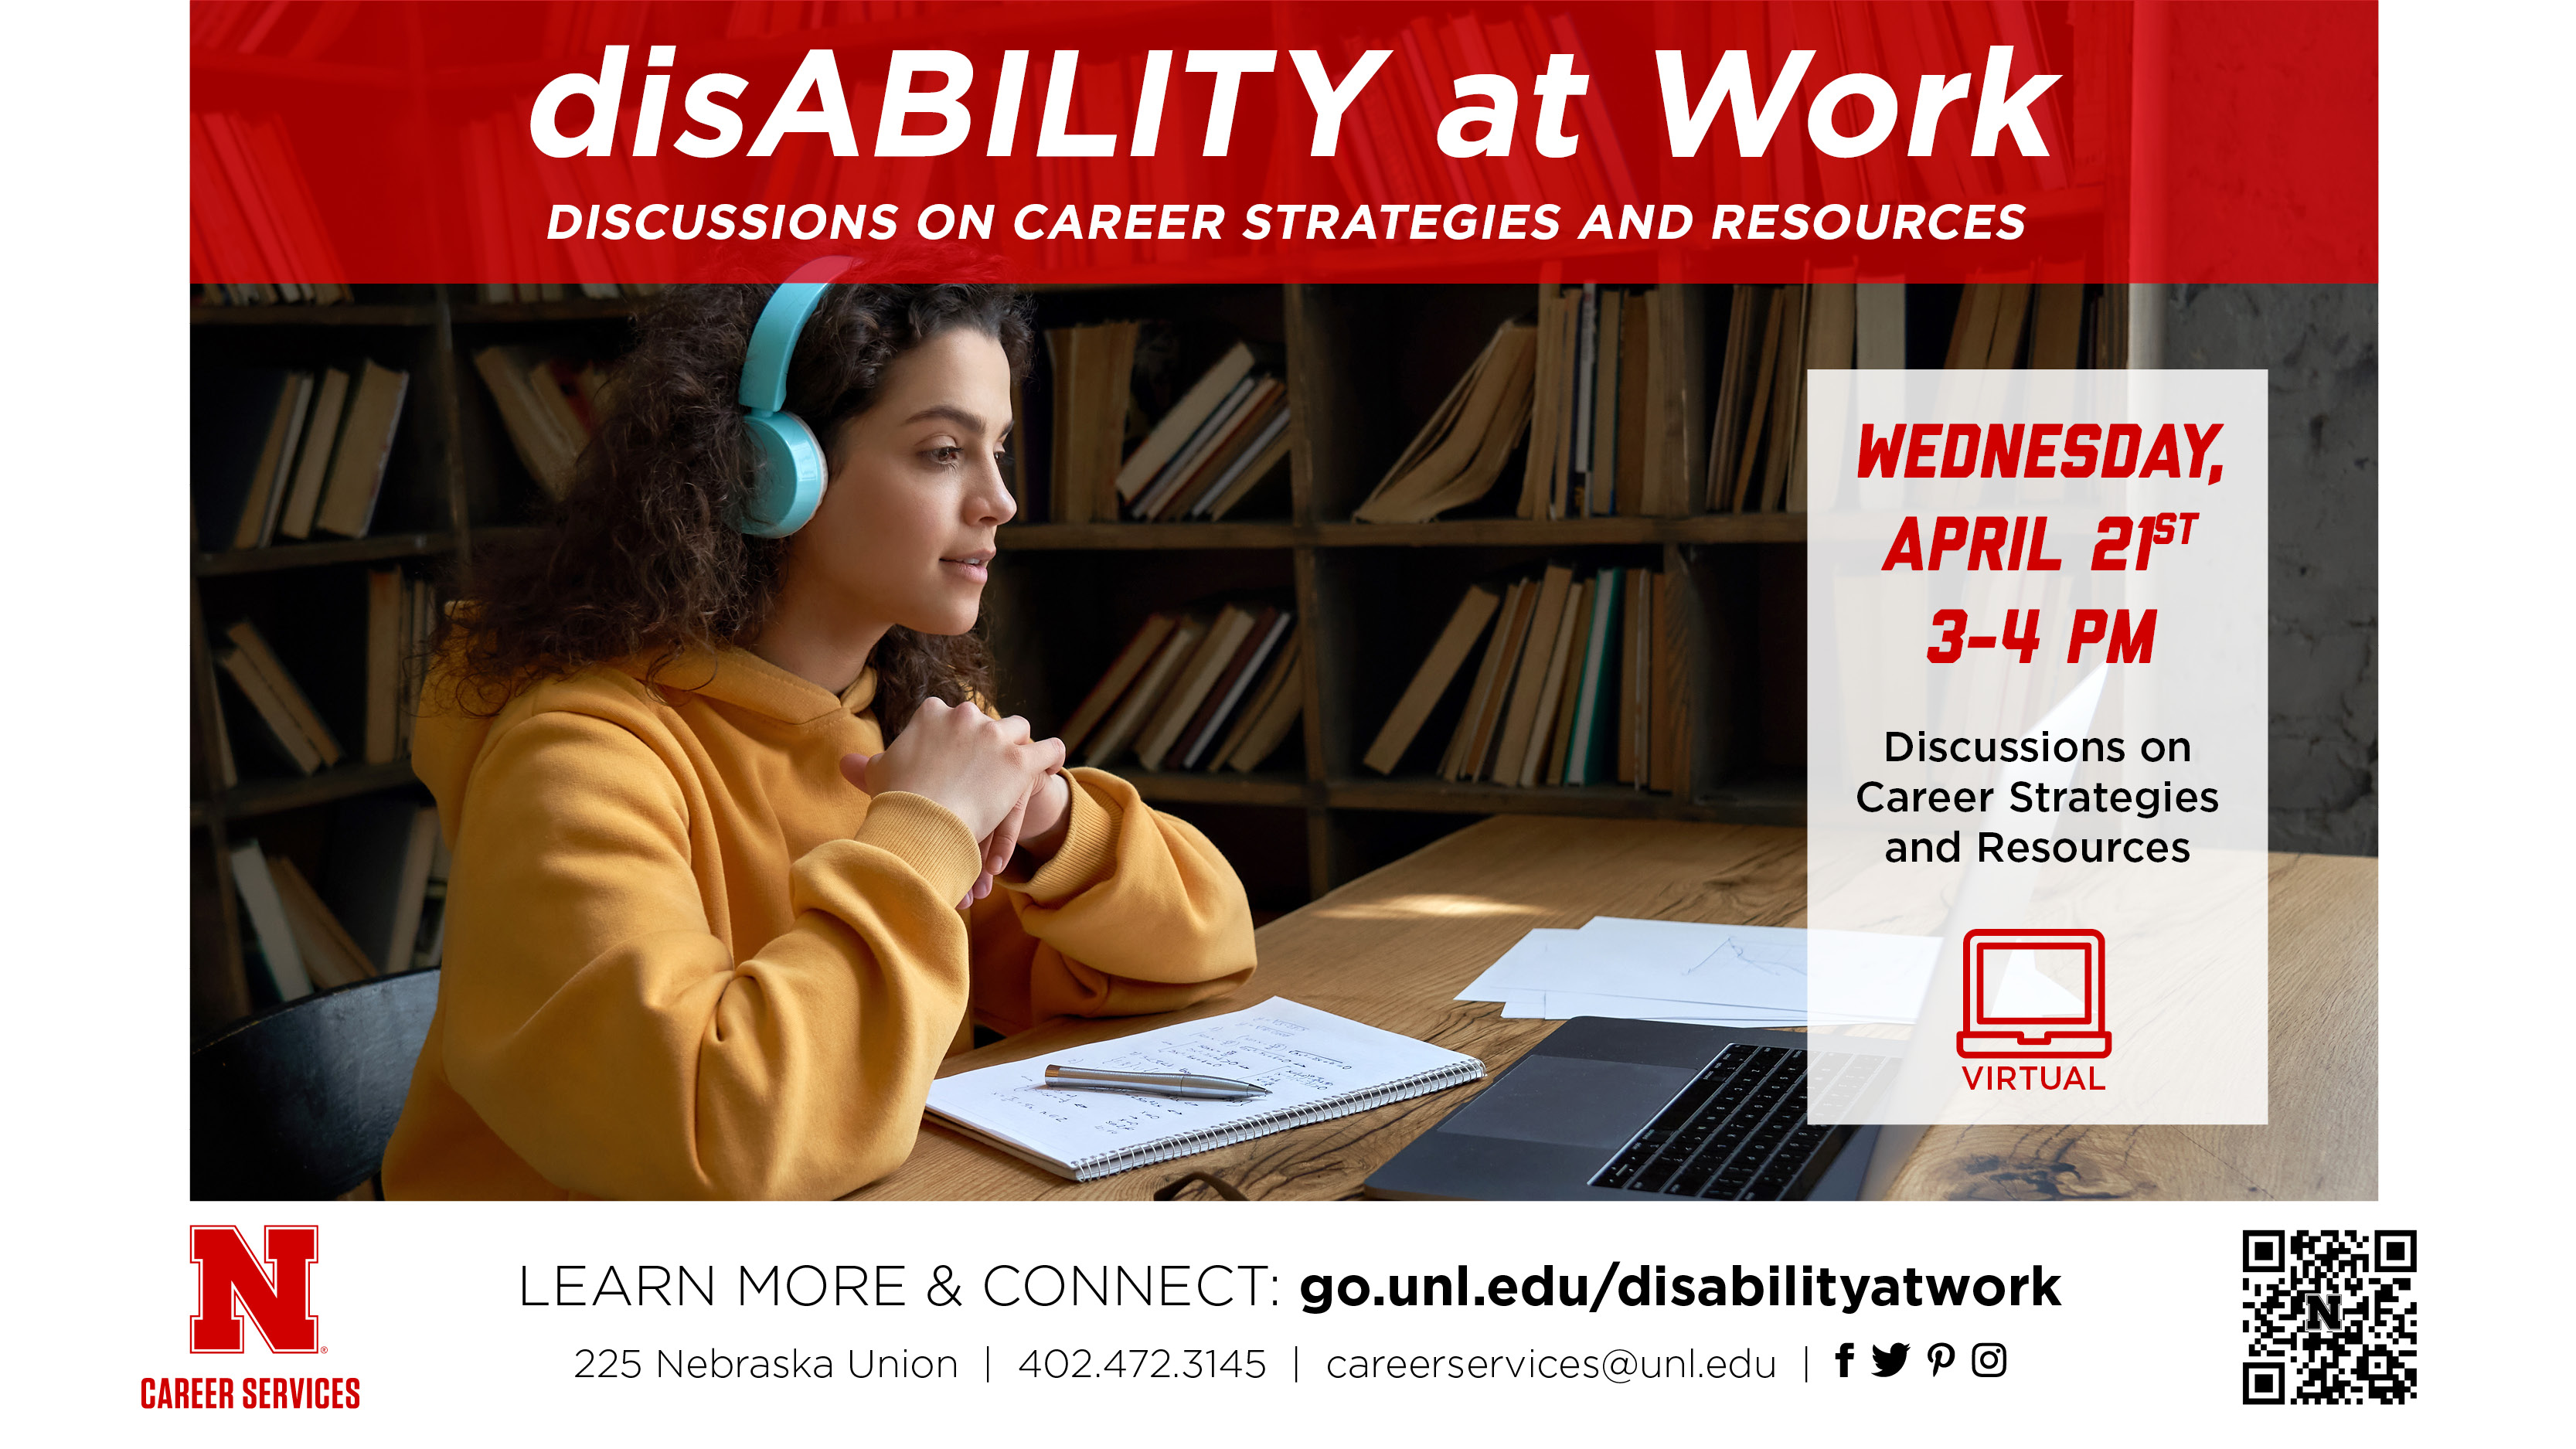 All are welcome to learn about strategies and resources that students with disabilities can use to be successful in their careers.